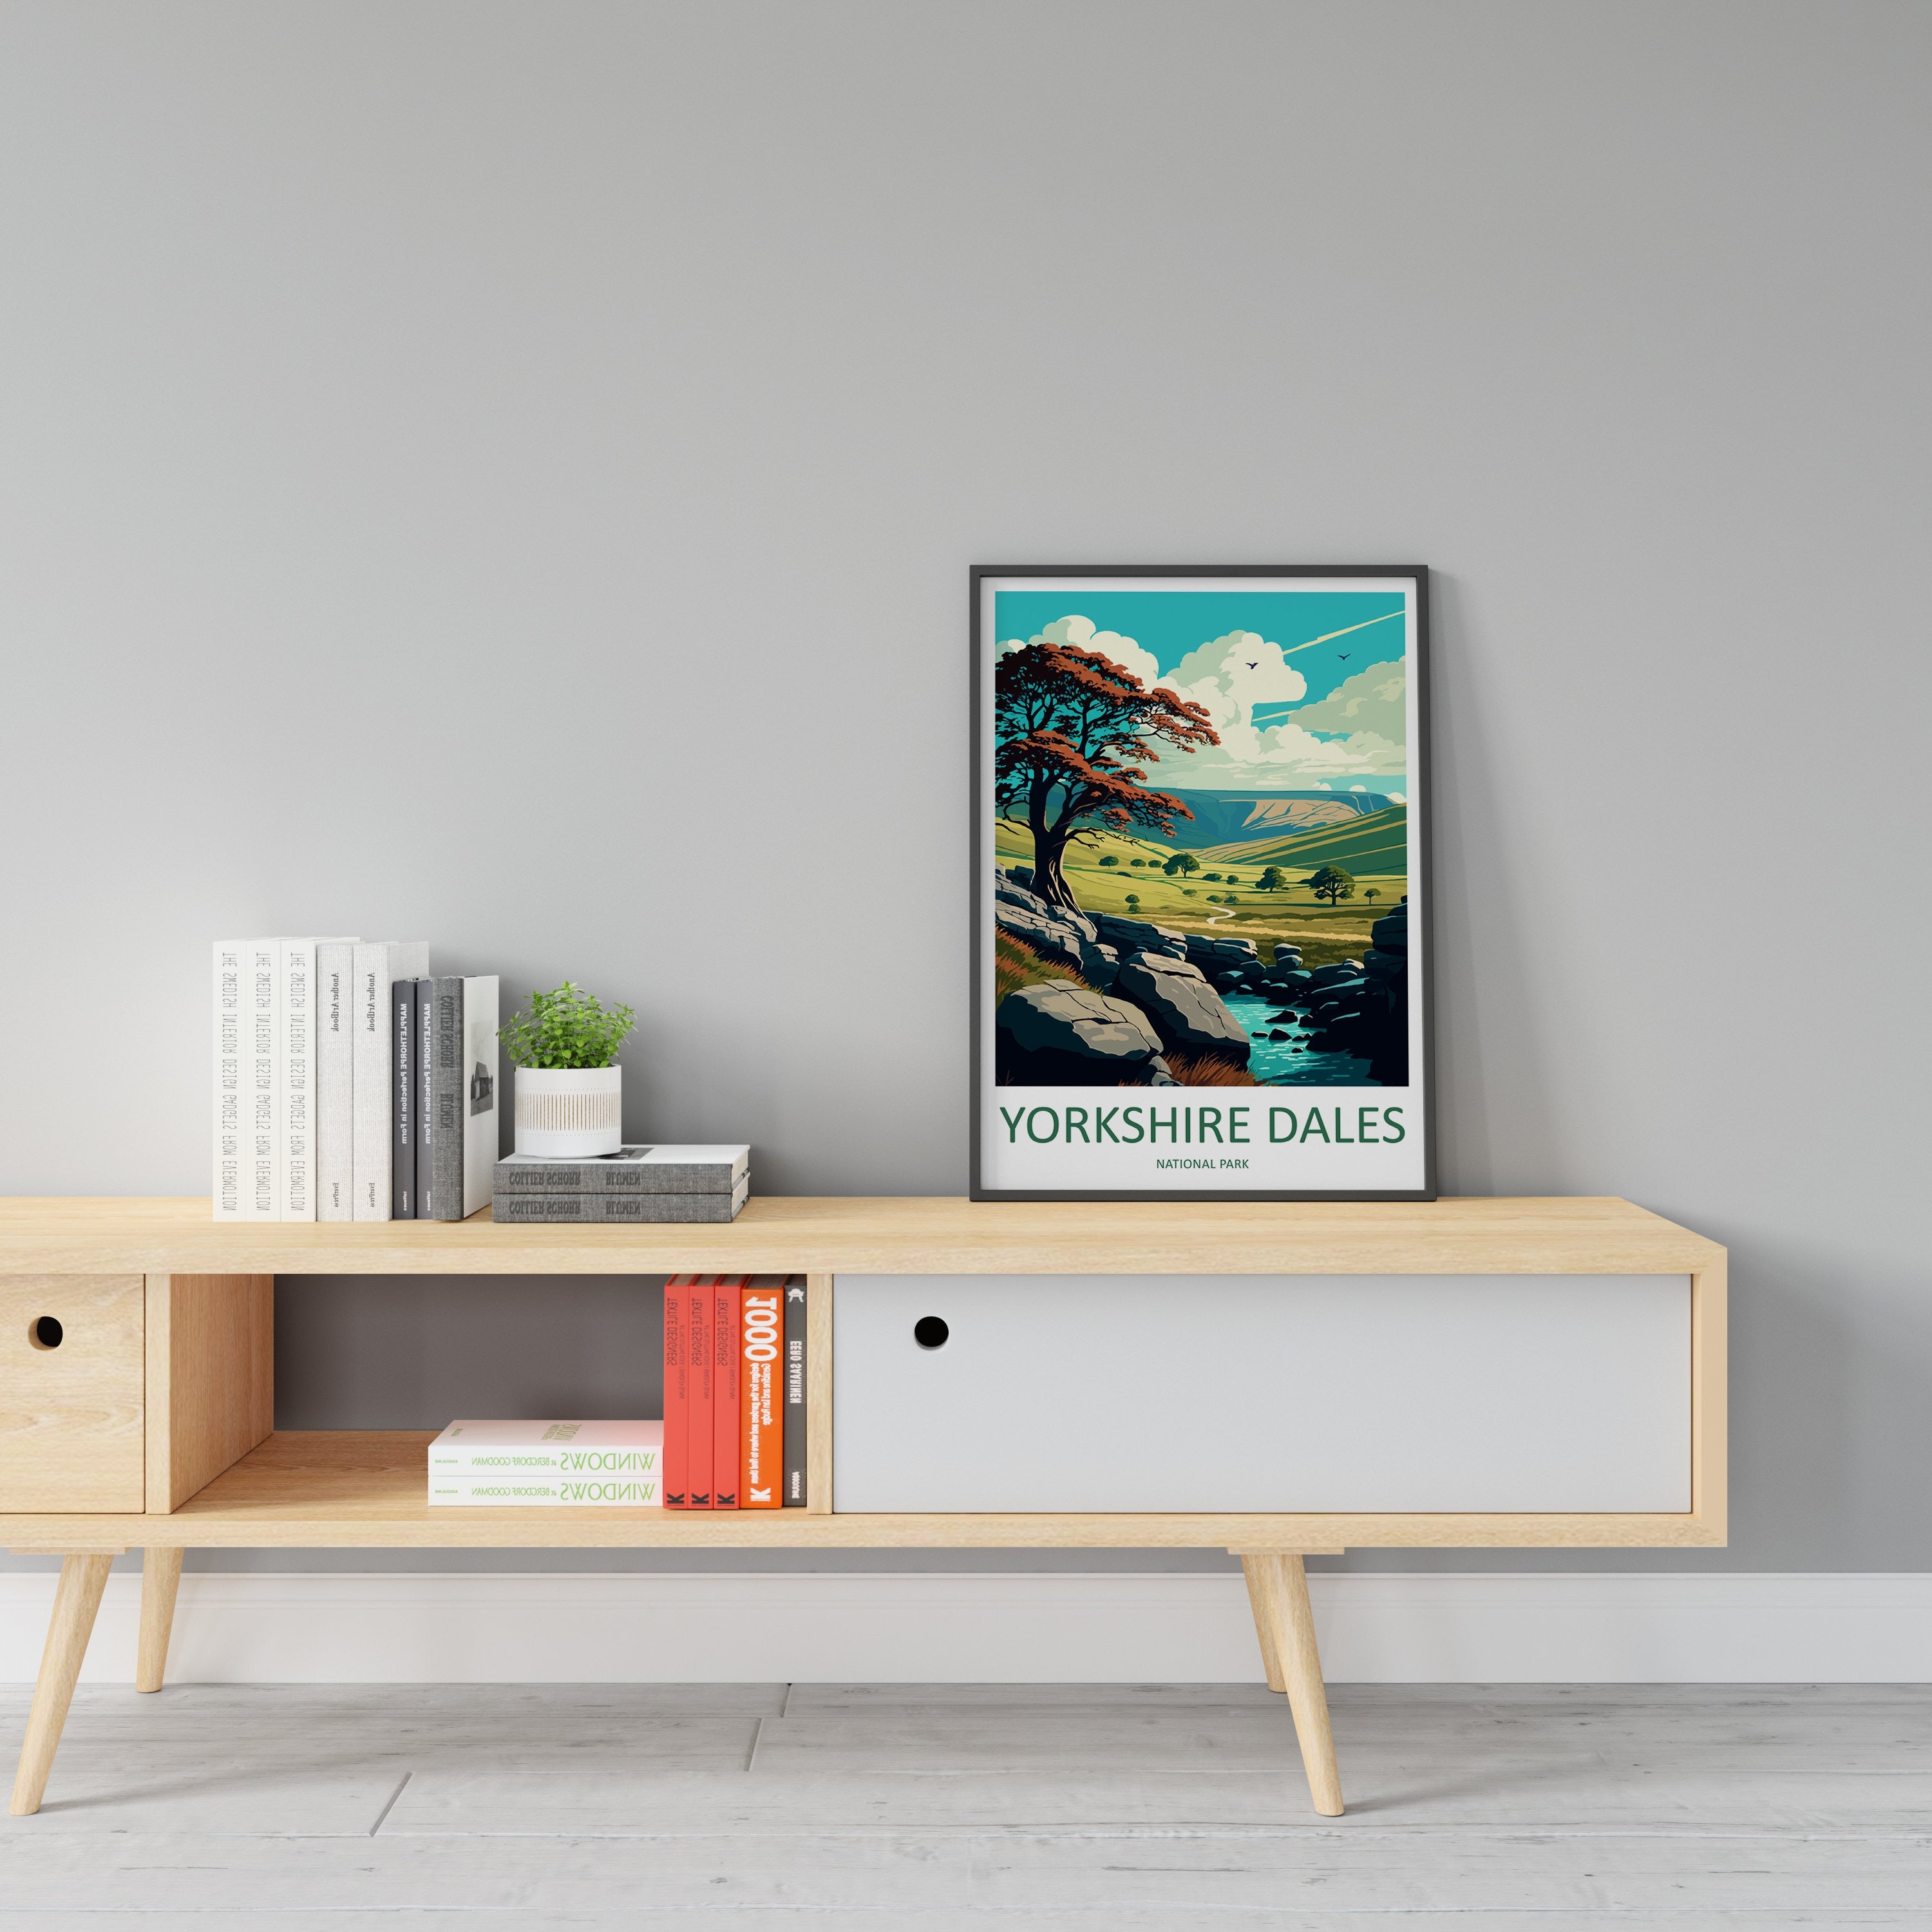 Yorkshire Dales Travel Print Wall Art Yorkshire Dales Wall Hanging Home Decor National Park Gift Yorkshire Dales Lovers National Park Wall